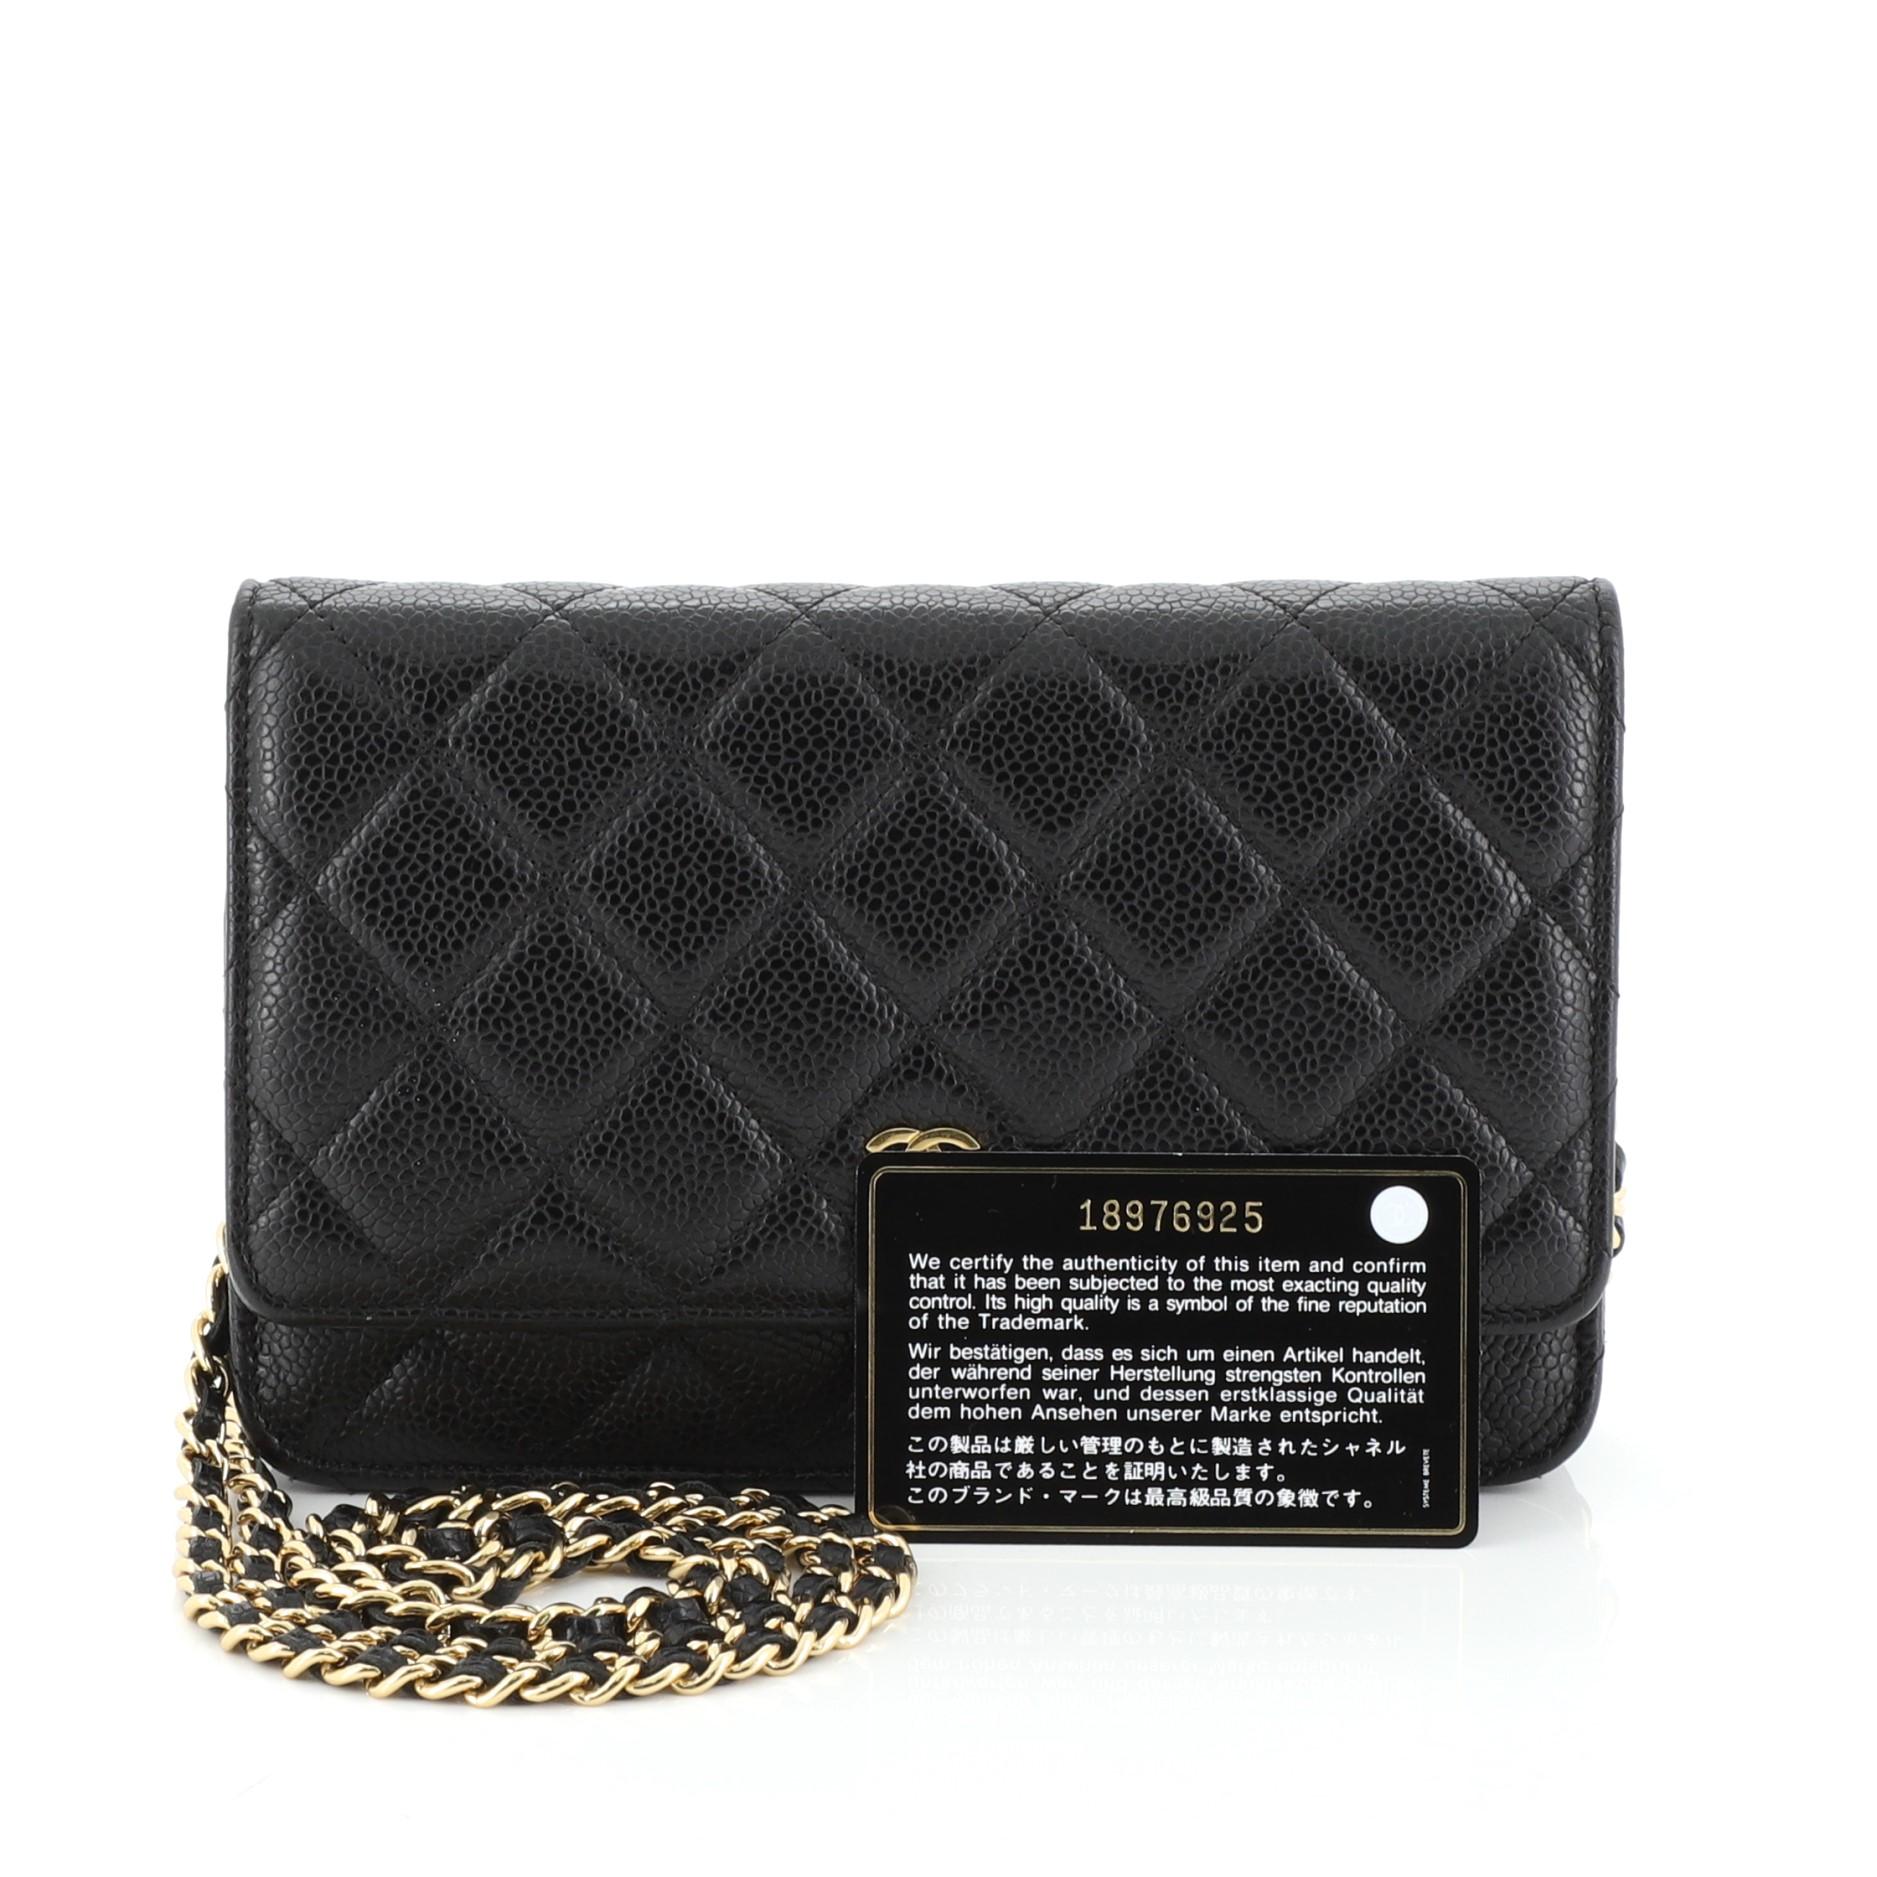 This Chanel Wallet on Chain Quilted Caviar, crafted in black quilted caviar leather, features woven-in leather chain strap, front flap with CC logo, exterior back slip pocket, and gold-tone hardware. Its magnetic snap button closure opens to a red